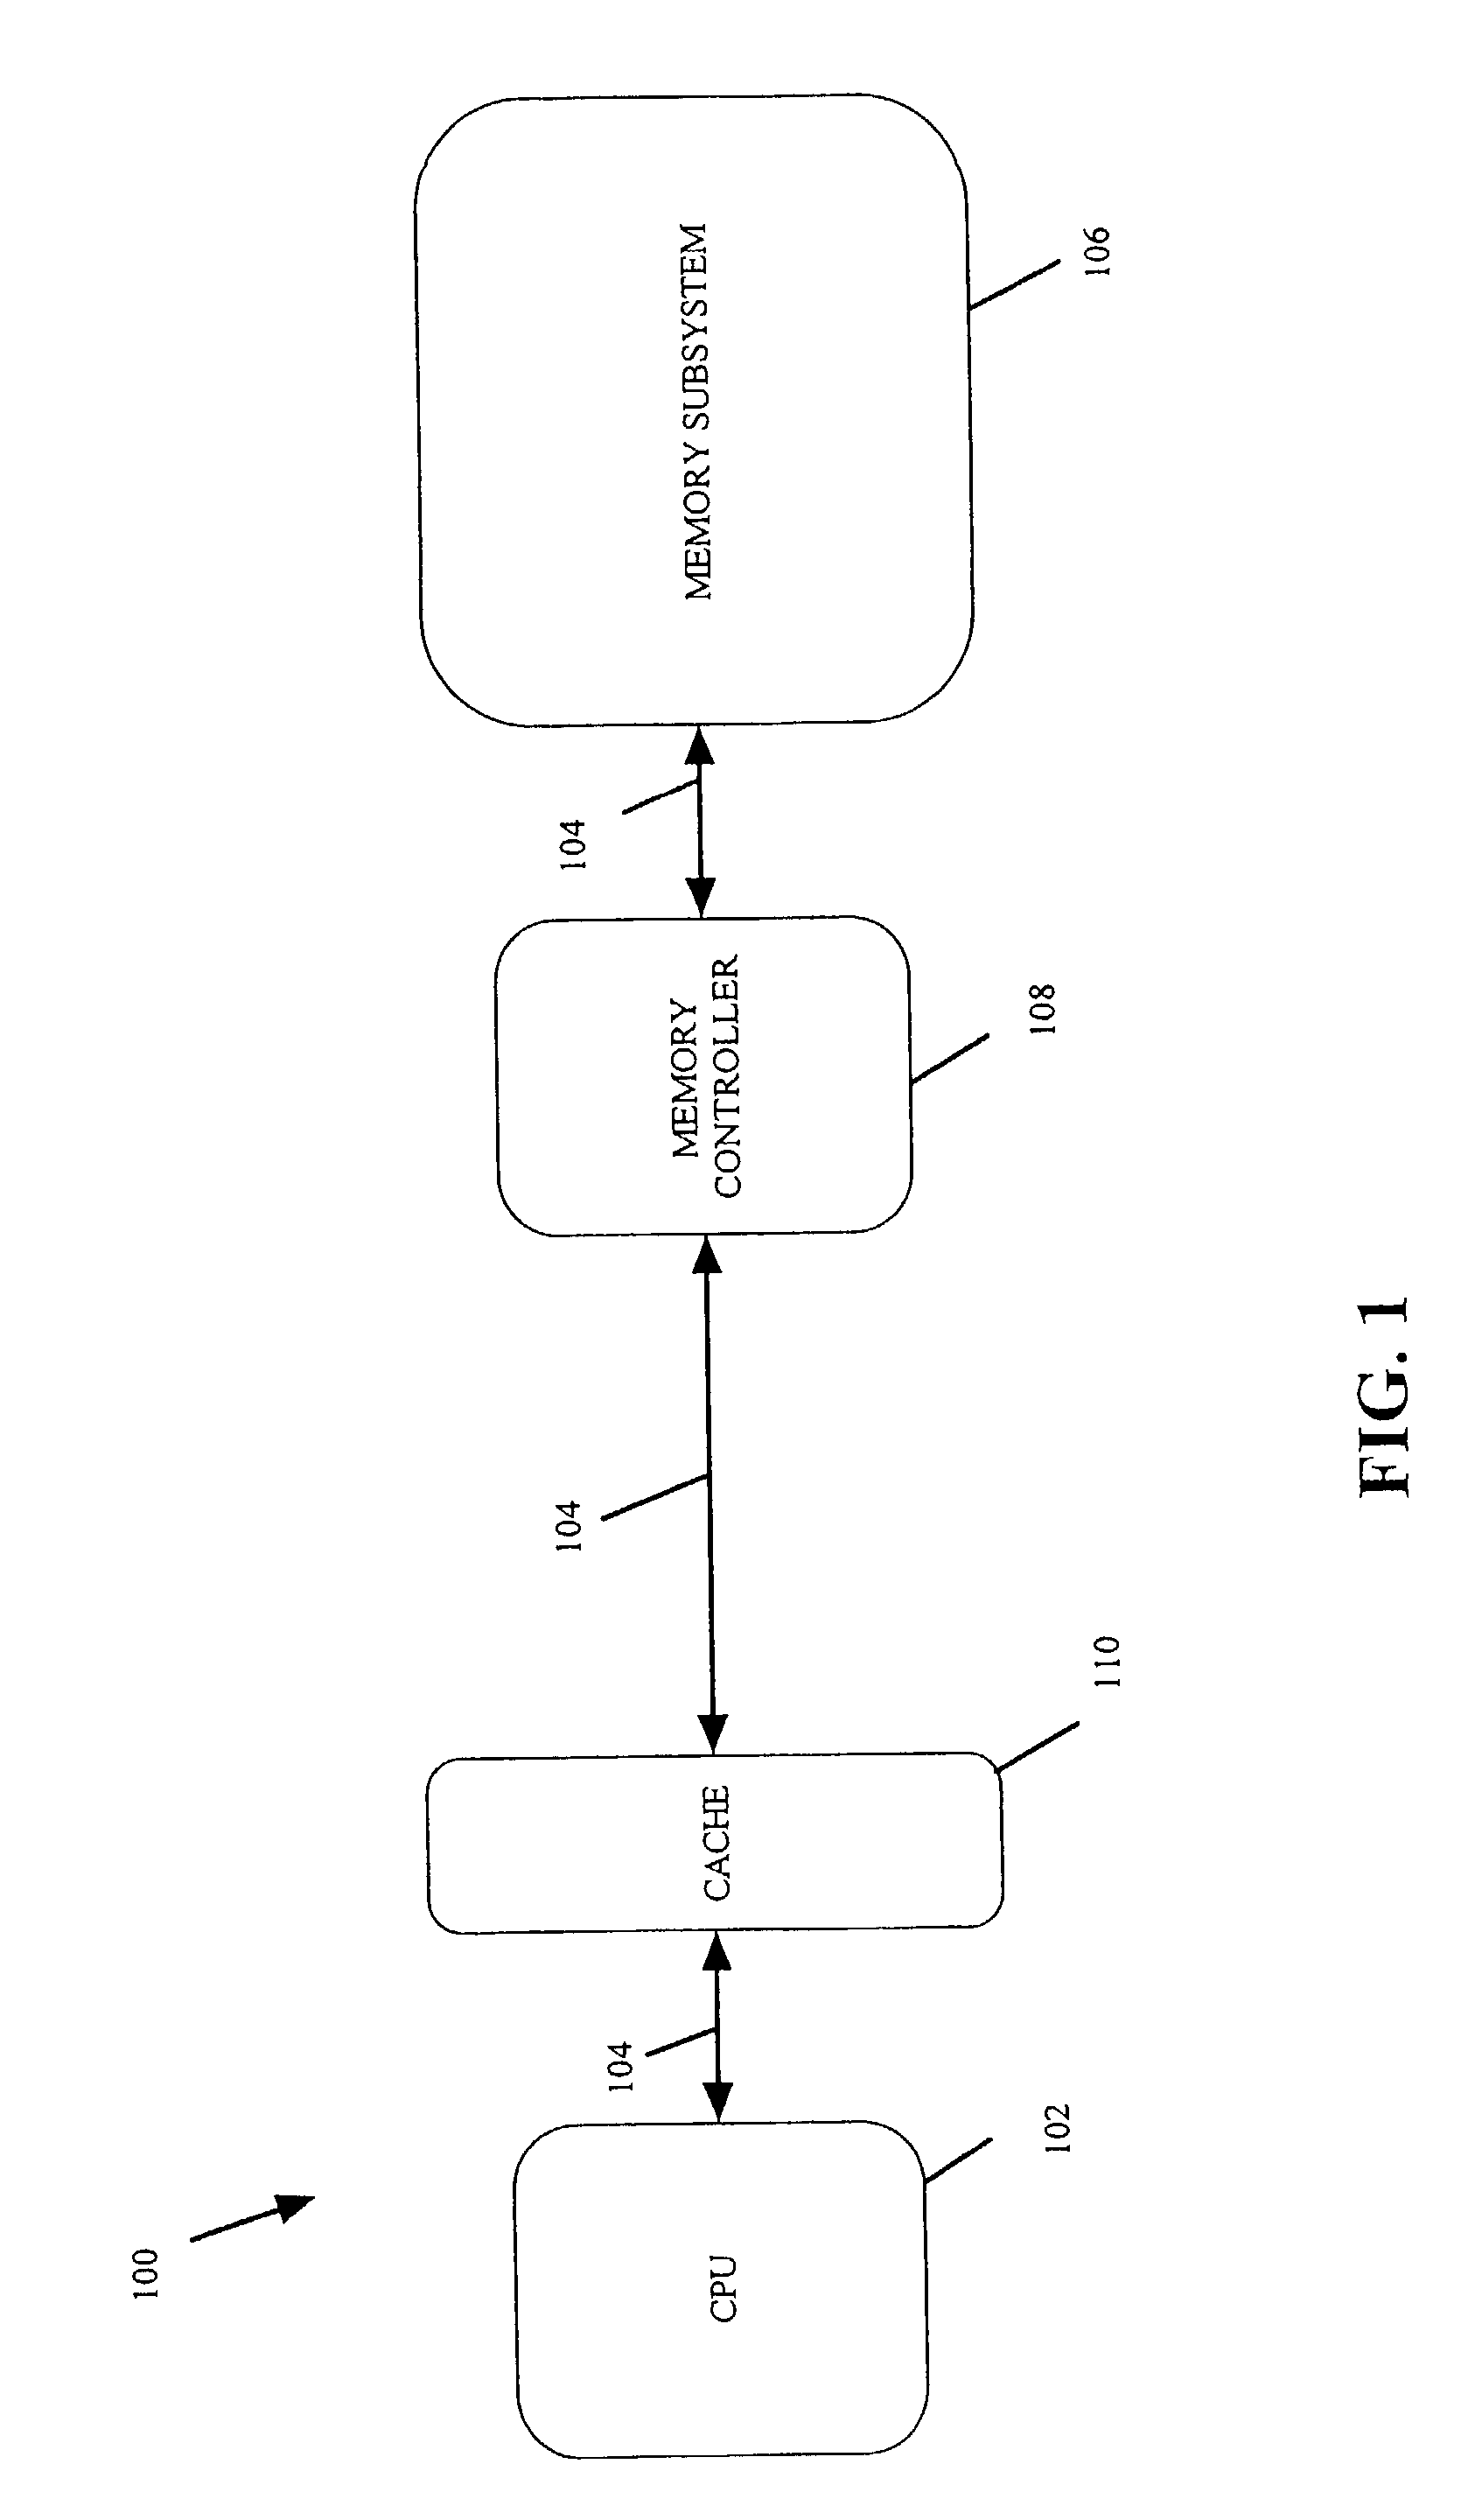 Interface receive circuits for modularized data optimization engines and methods therefor